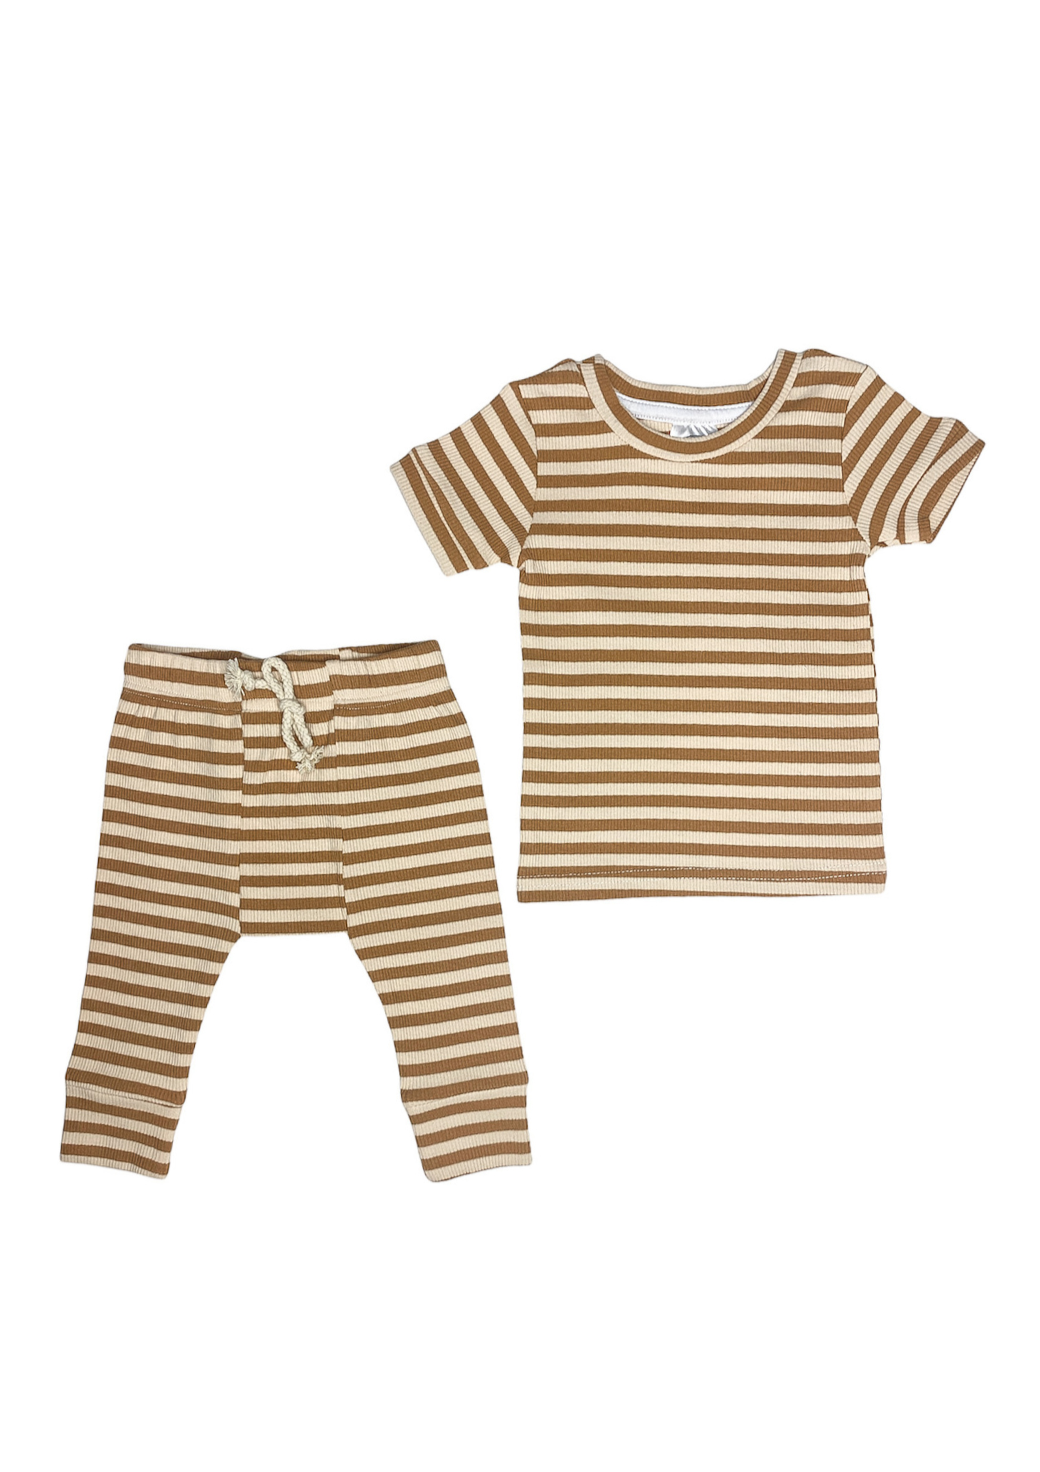 SHORT SLEEVE RIBBED LOUNGE SET IN STRIPED MUSTARD